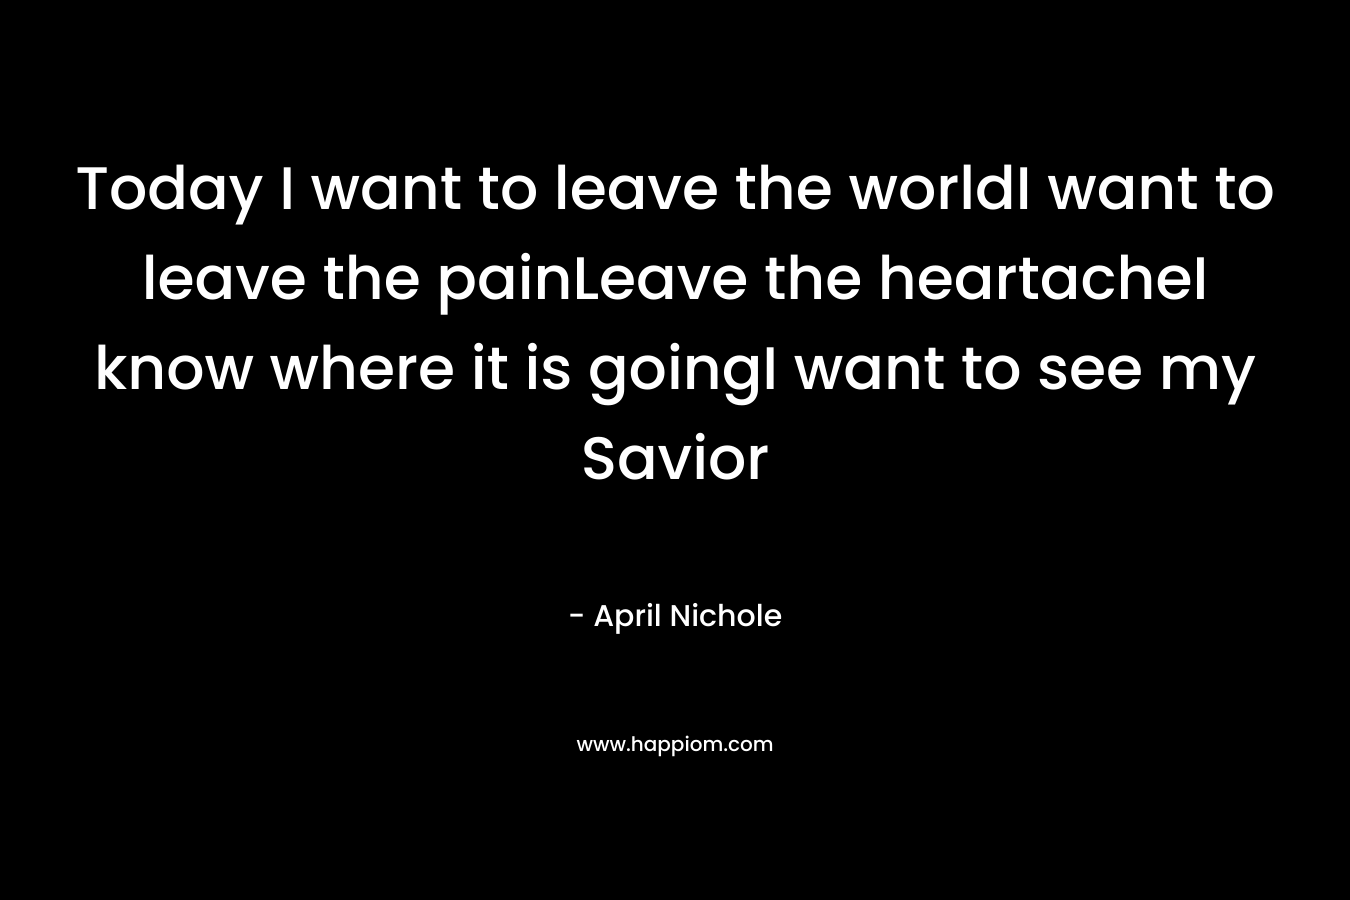 Today I want to leave the worldI want to leave the painLeave the heartacheI know where it is goingI want to see my Savior – April Nichole